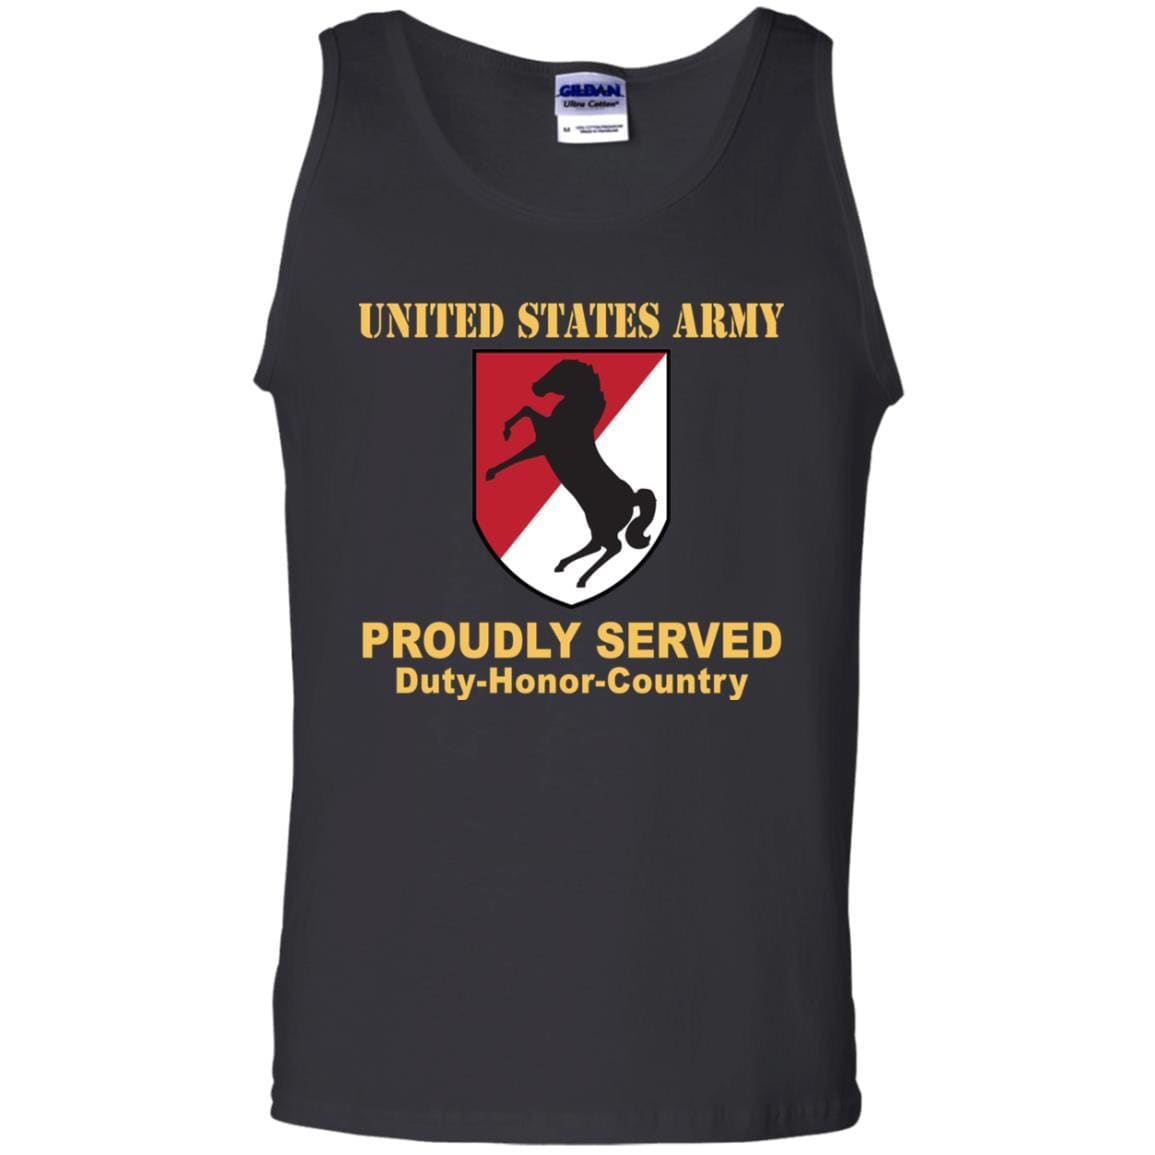 US ARMY 11TH ARMORED CAVALRY REGIMENT- Proudly Served T-Shirt On Front For Men-TShirt-Army-Veterans Nation